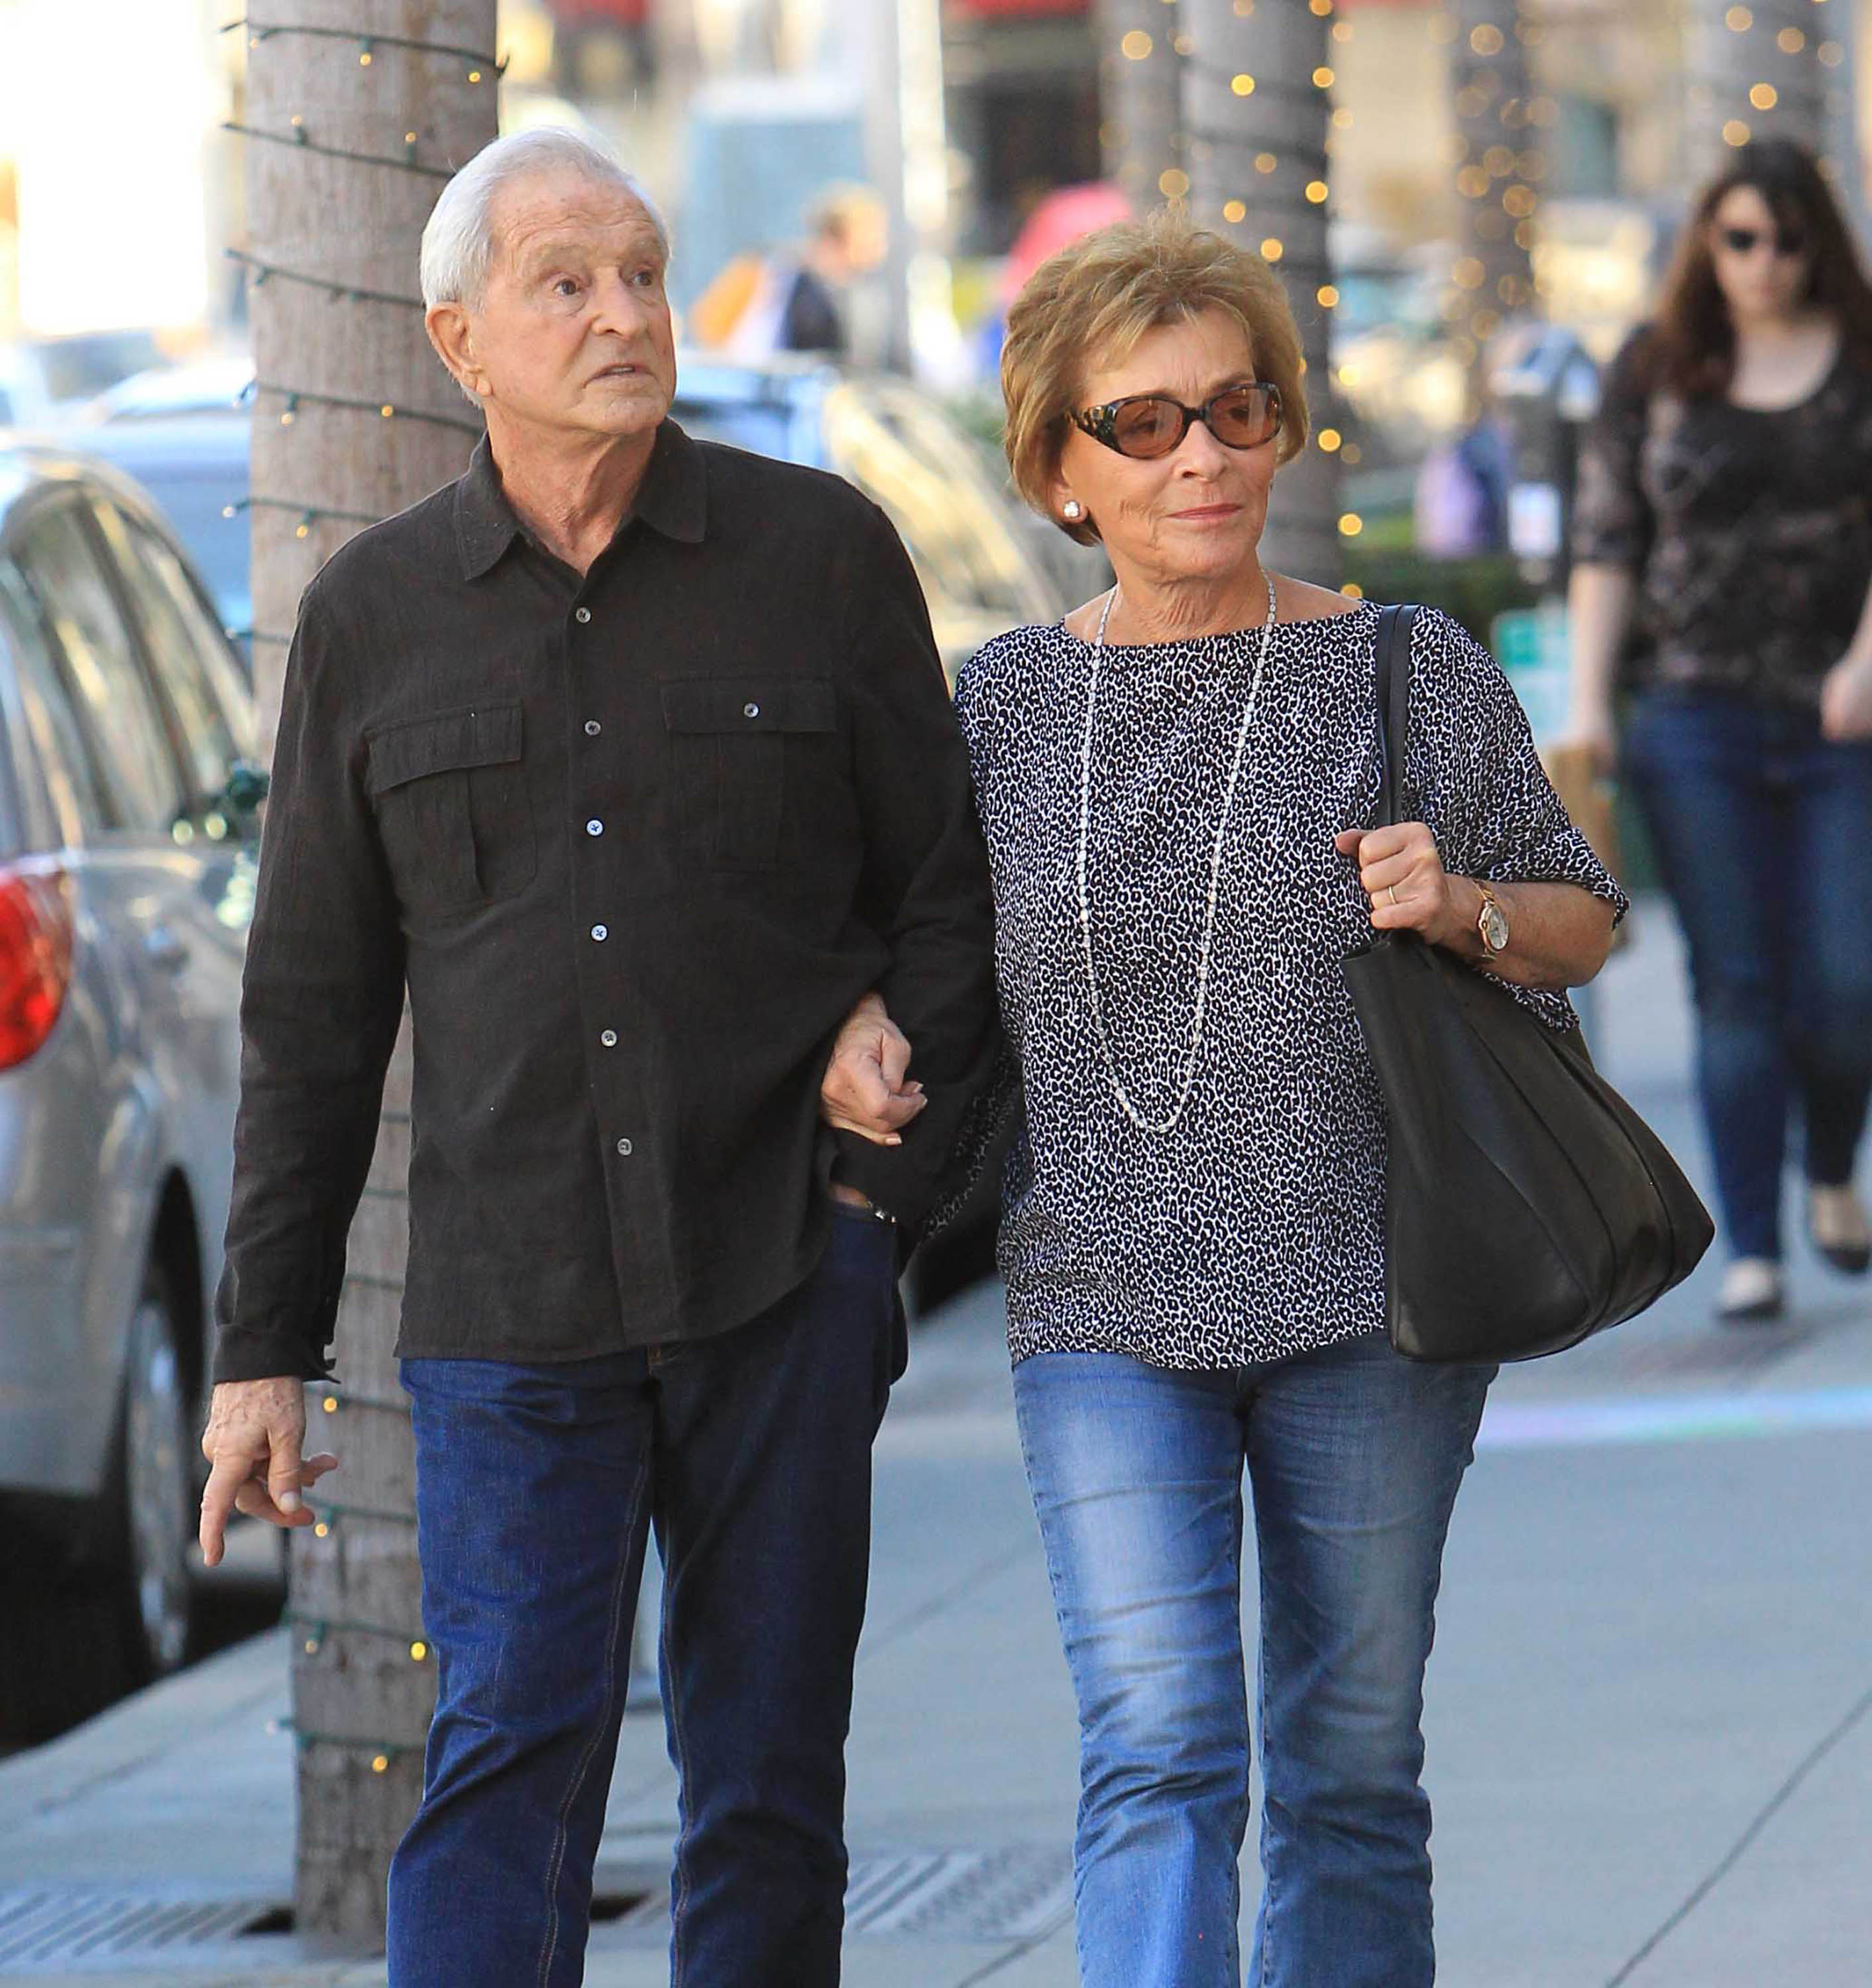 Judge Judy Sheindlin and husband Jerry Sheindlin in Los Angeles, California on December 15, 2017 | Source: Getty Images